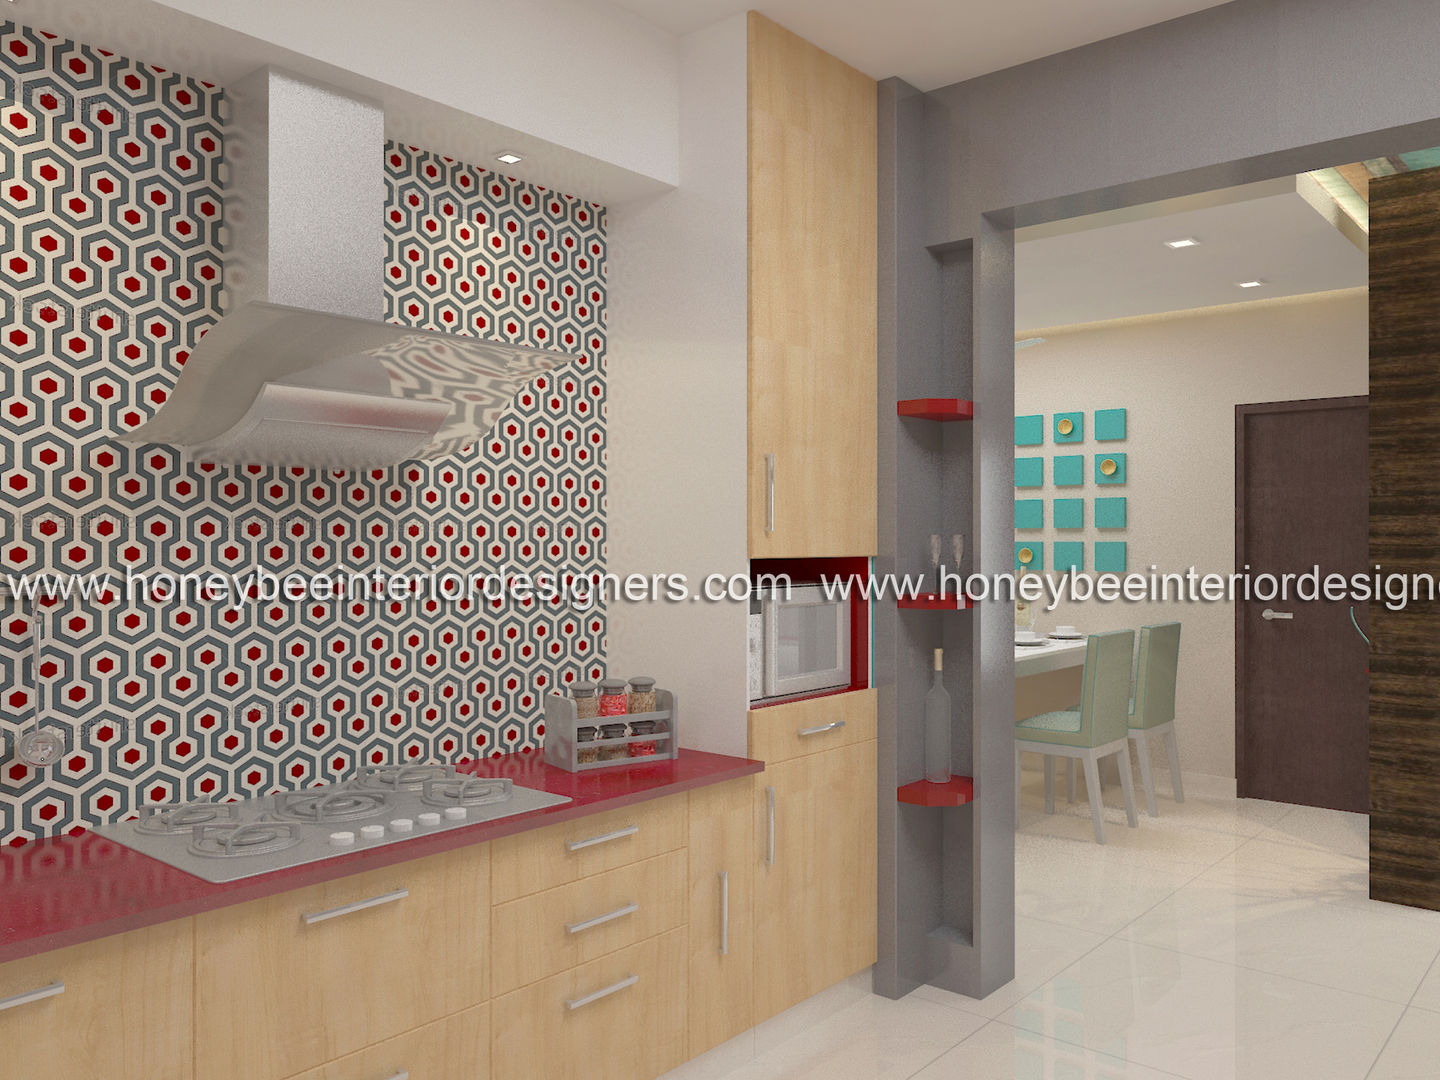 3 BHK Apartment for a young couple, Honeybee Interior Designers Honeybee Interior Designers Tủ bếp